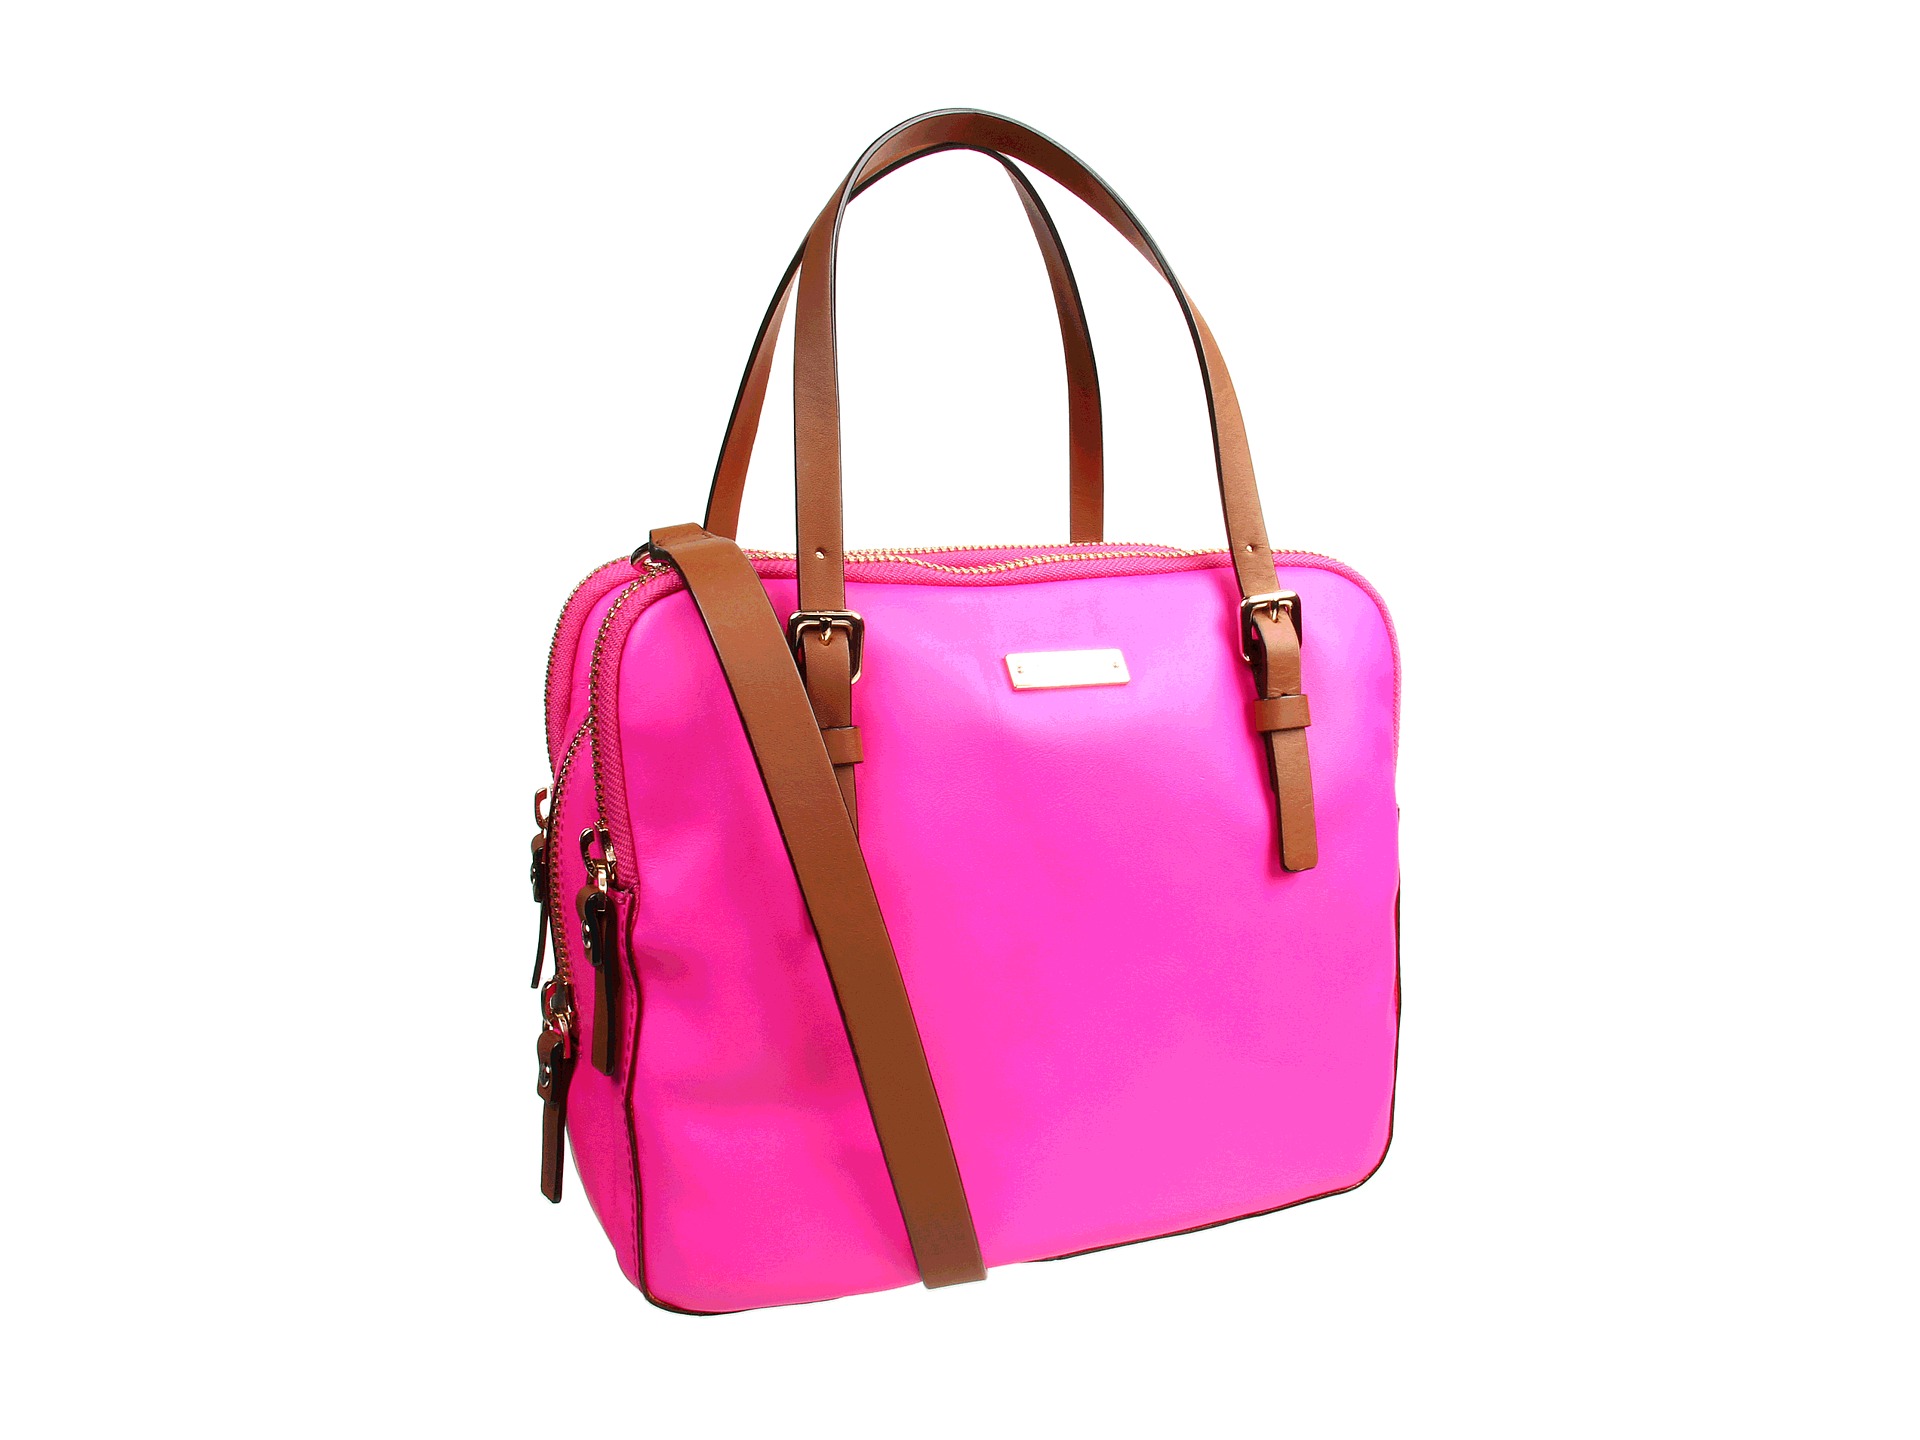 Kate Spade New York Chambers Street Carlyle $250.60 $358.00 Rated 3 